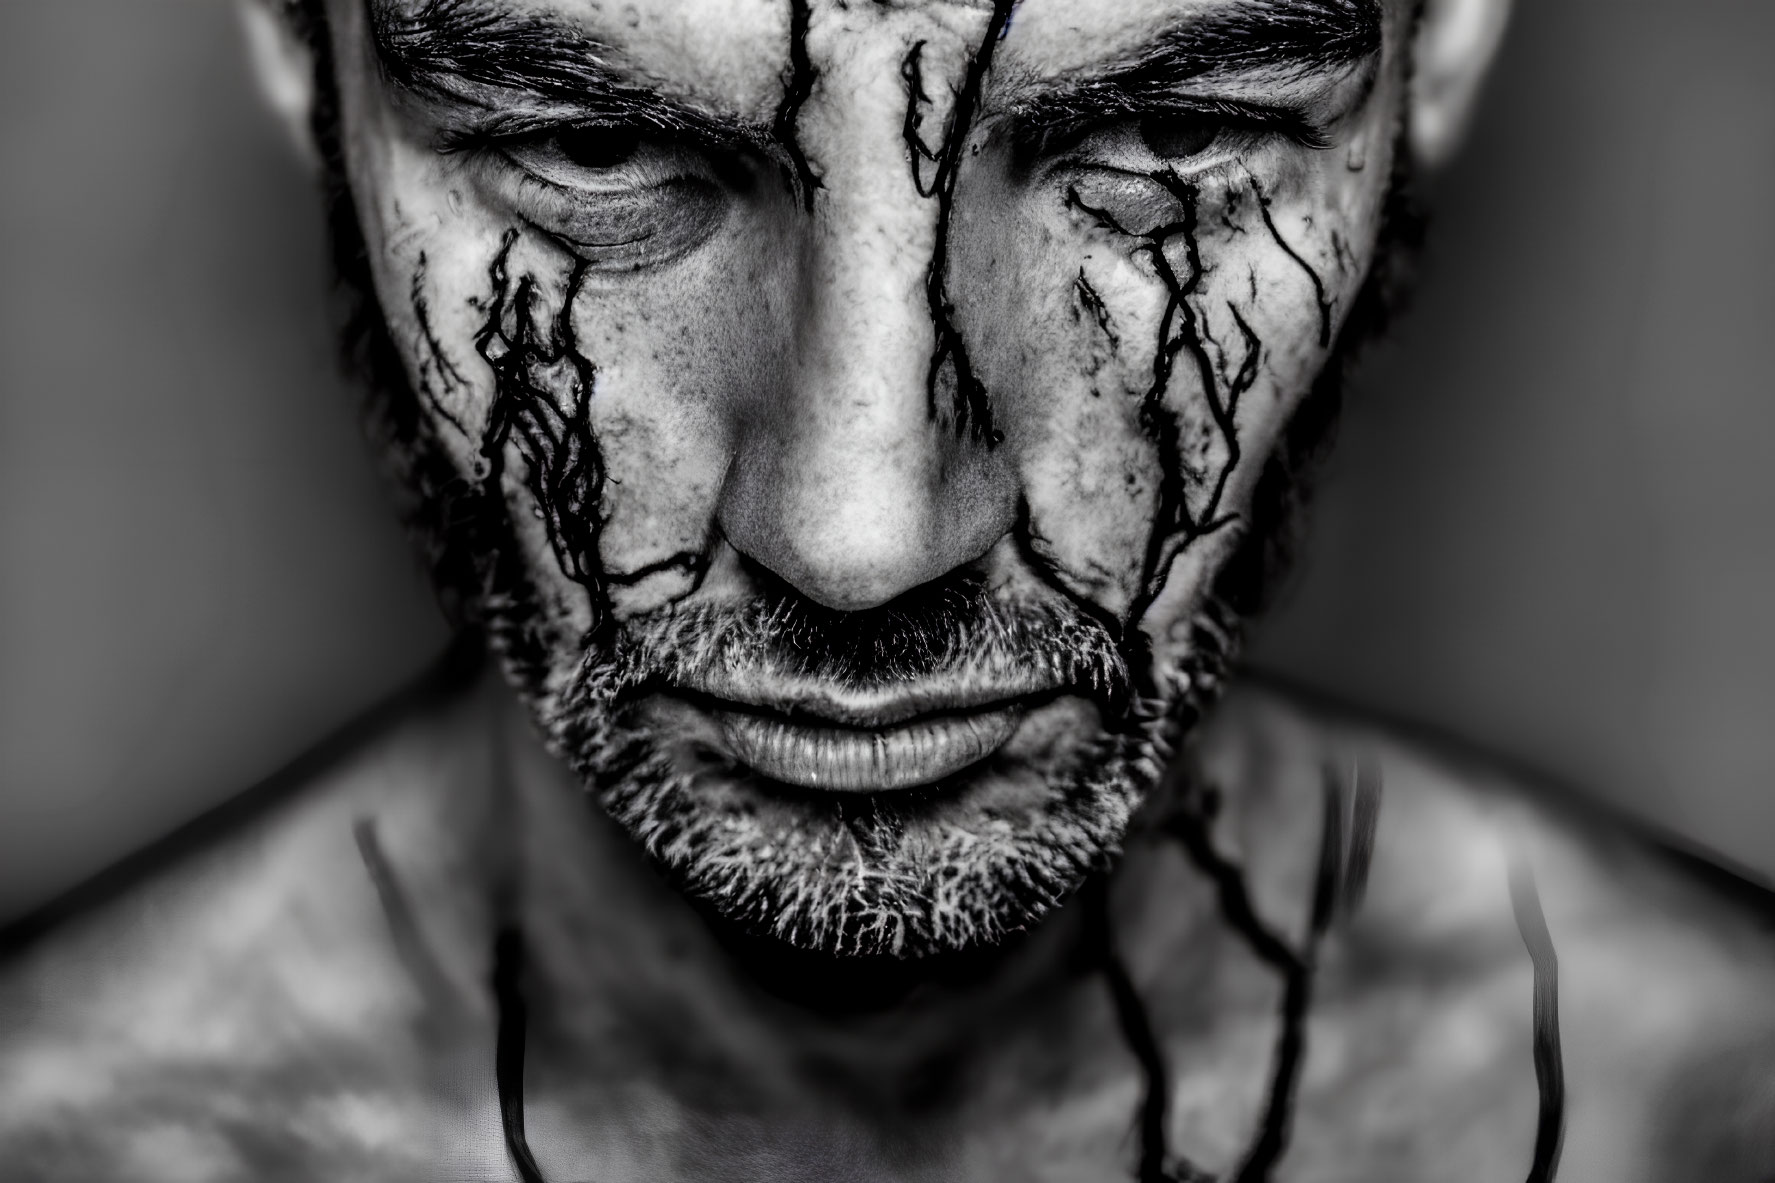 Monochrome close-up photo of person with cracked earth face paint